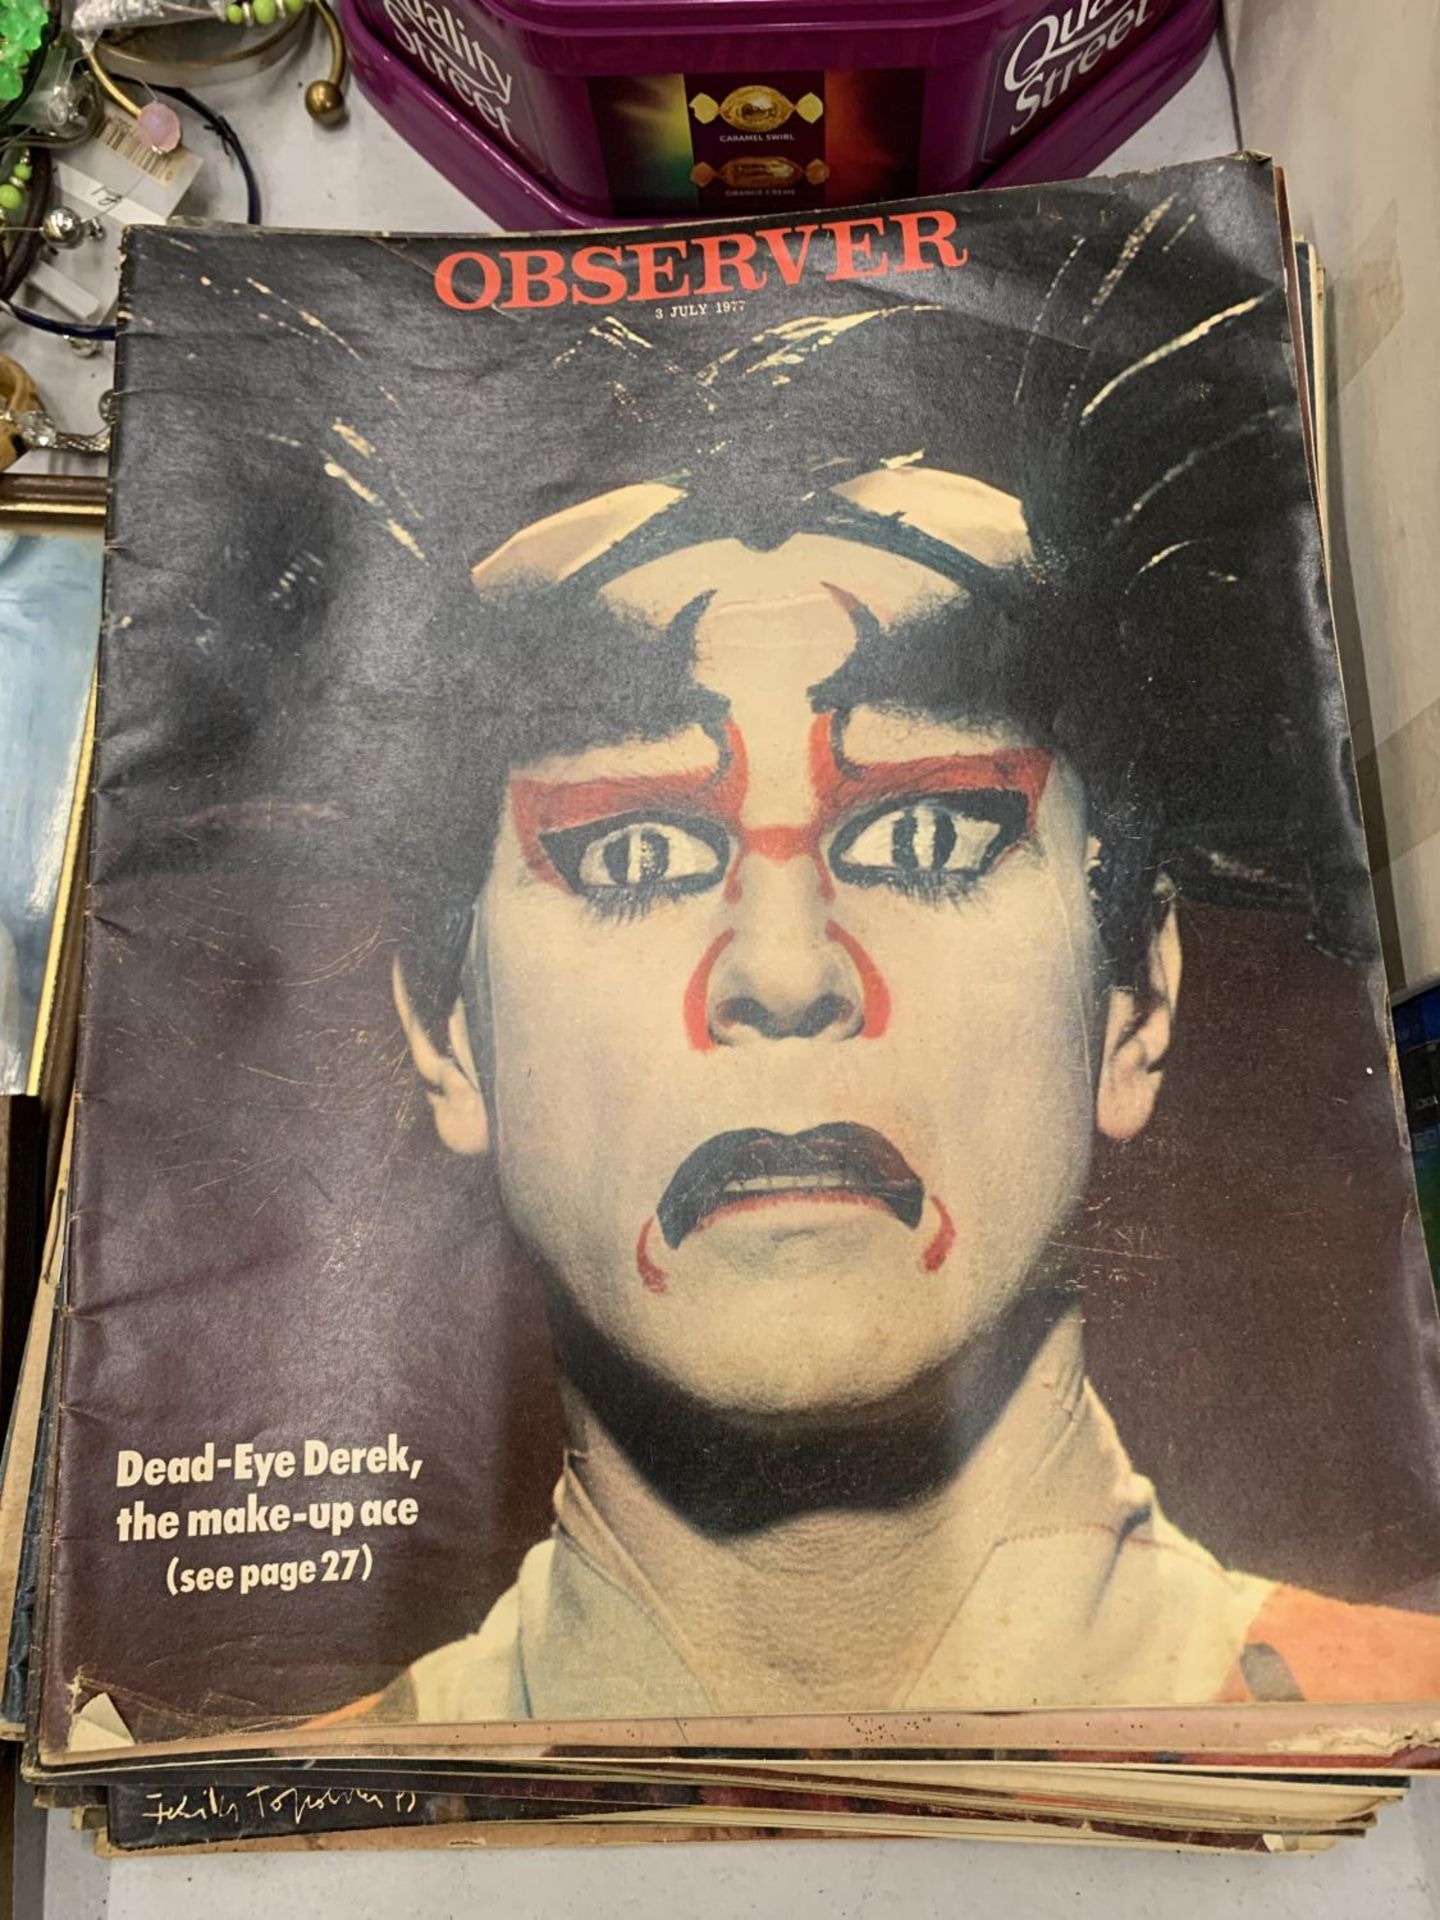 A QUANTITY OF 1970'S OBSERVER, ETC MAGAZINES - 18 IN TOTAL